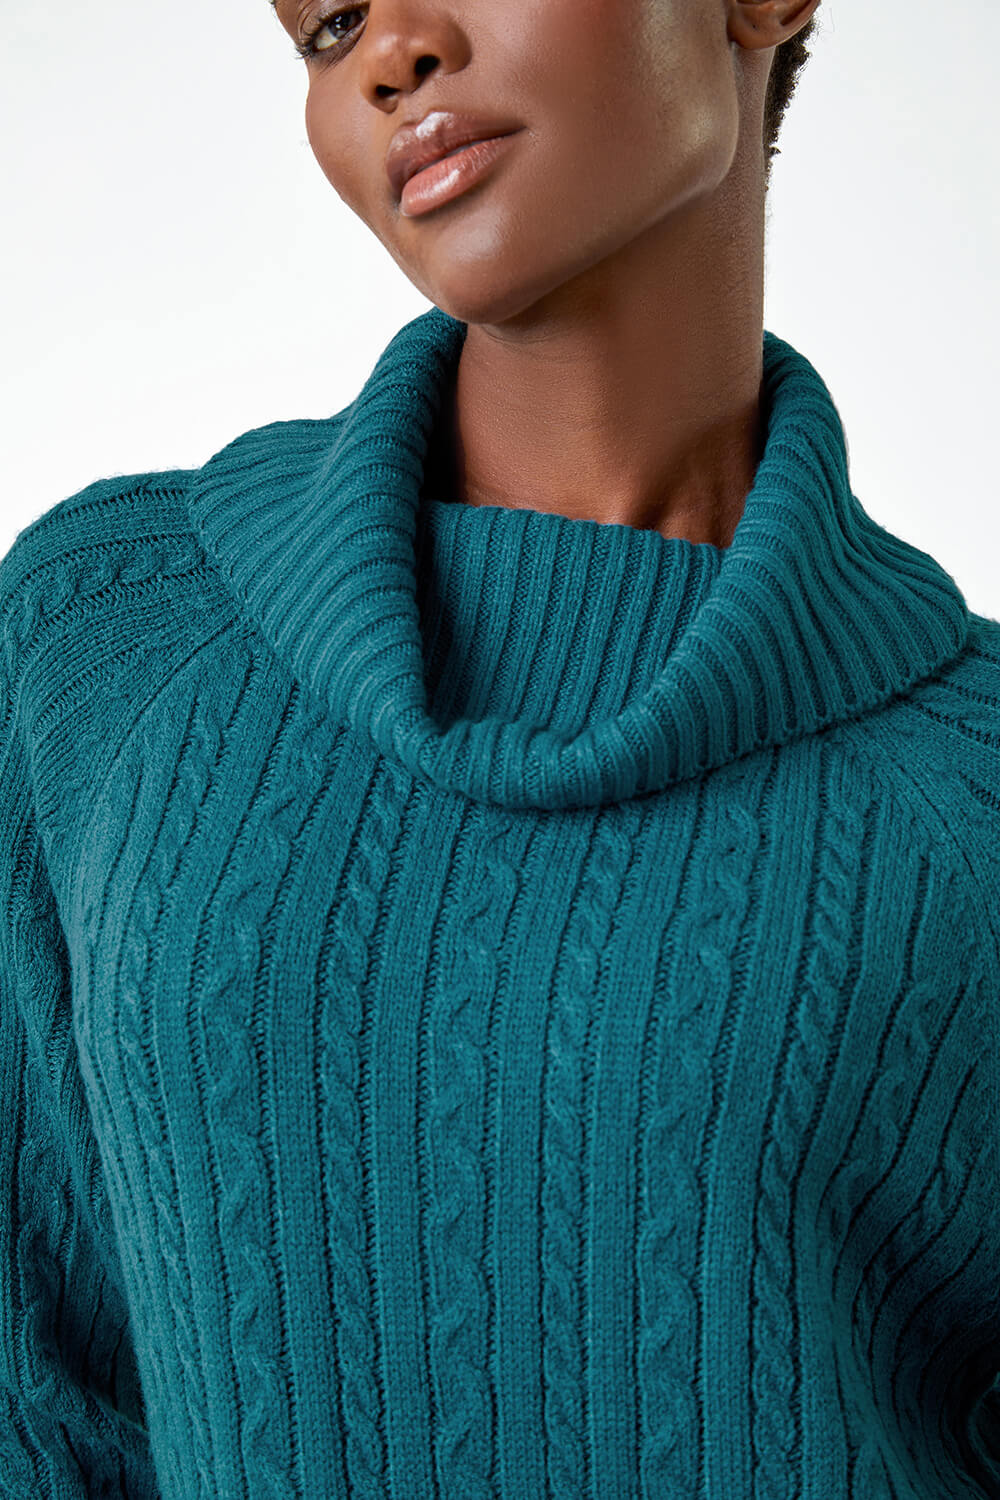 Teal Roll Neck Knitted Jumper Dress, Image 5 of 5